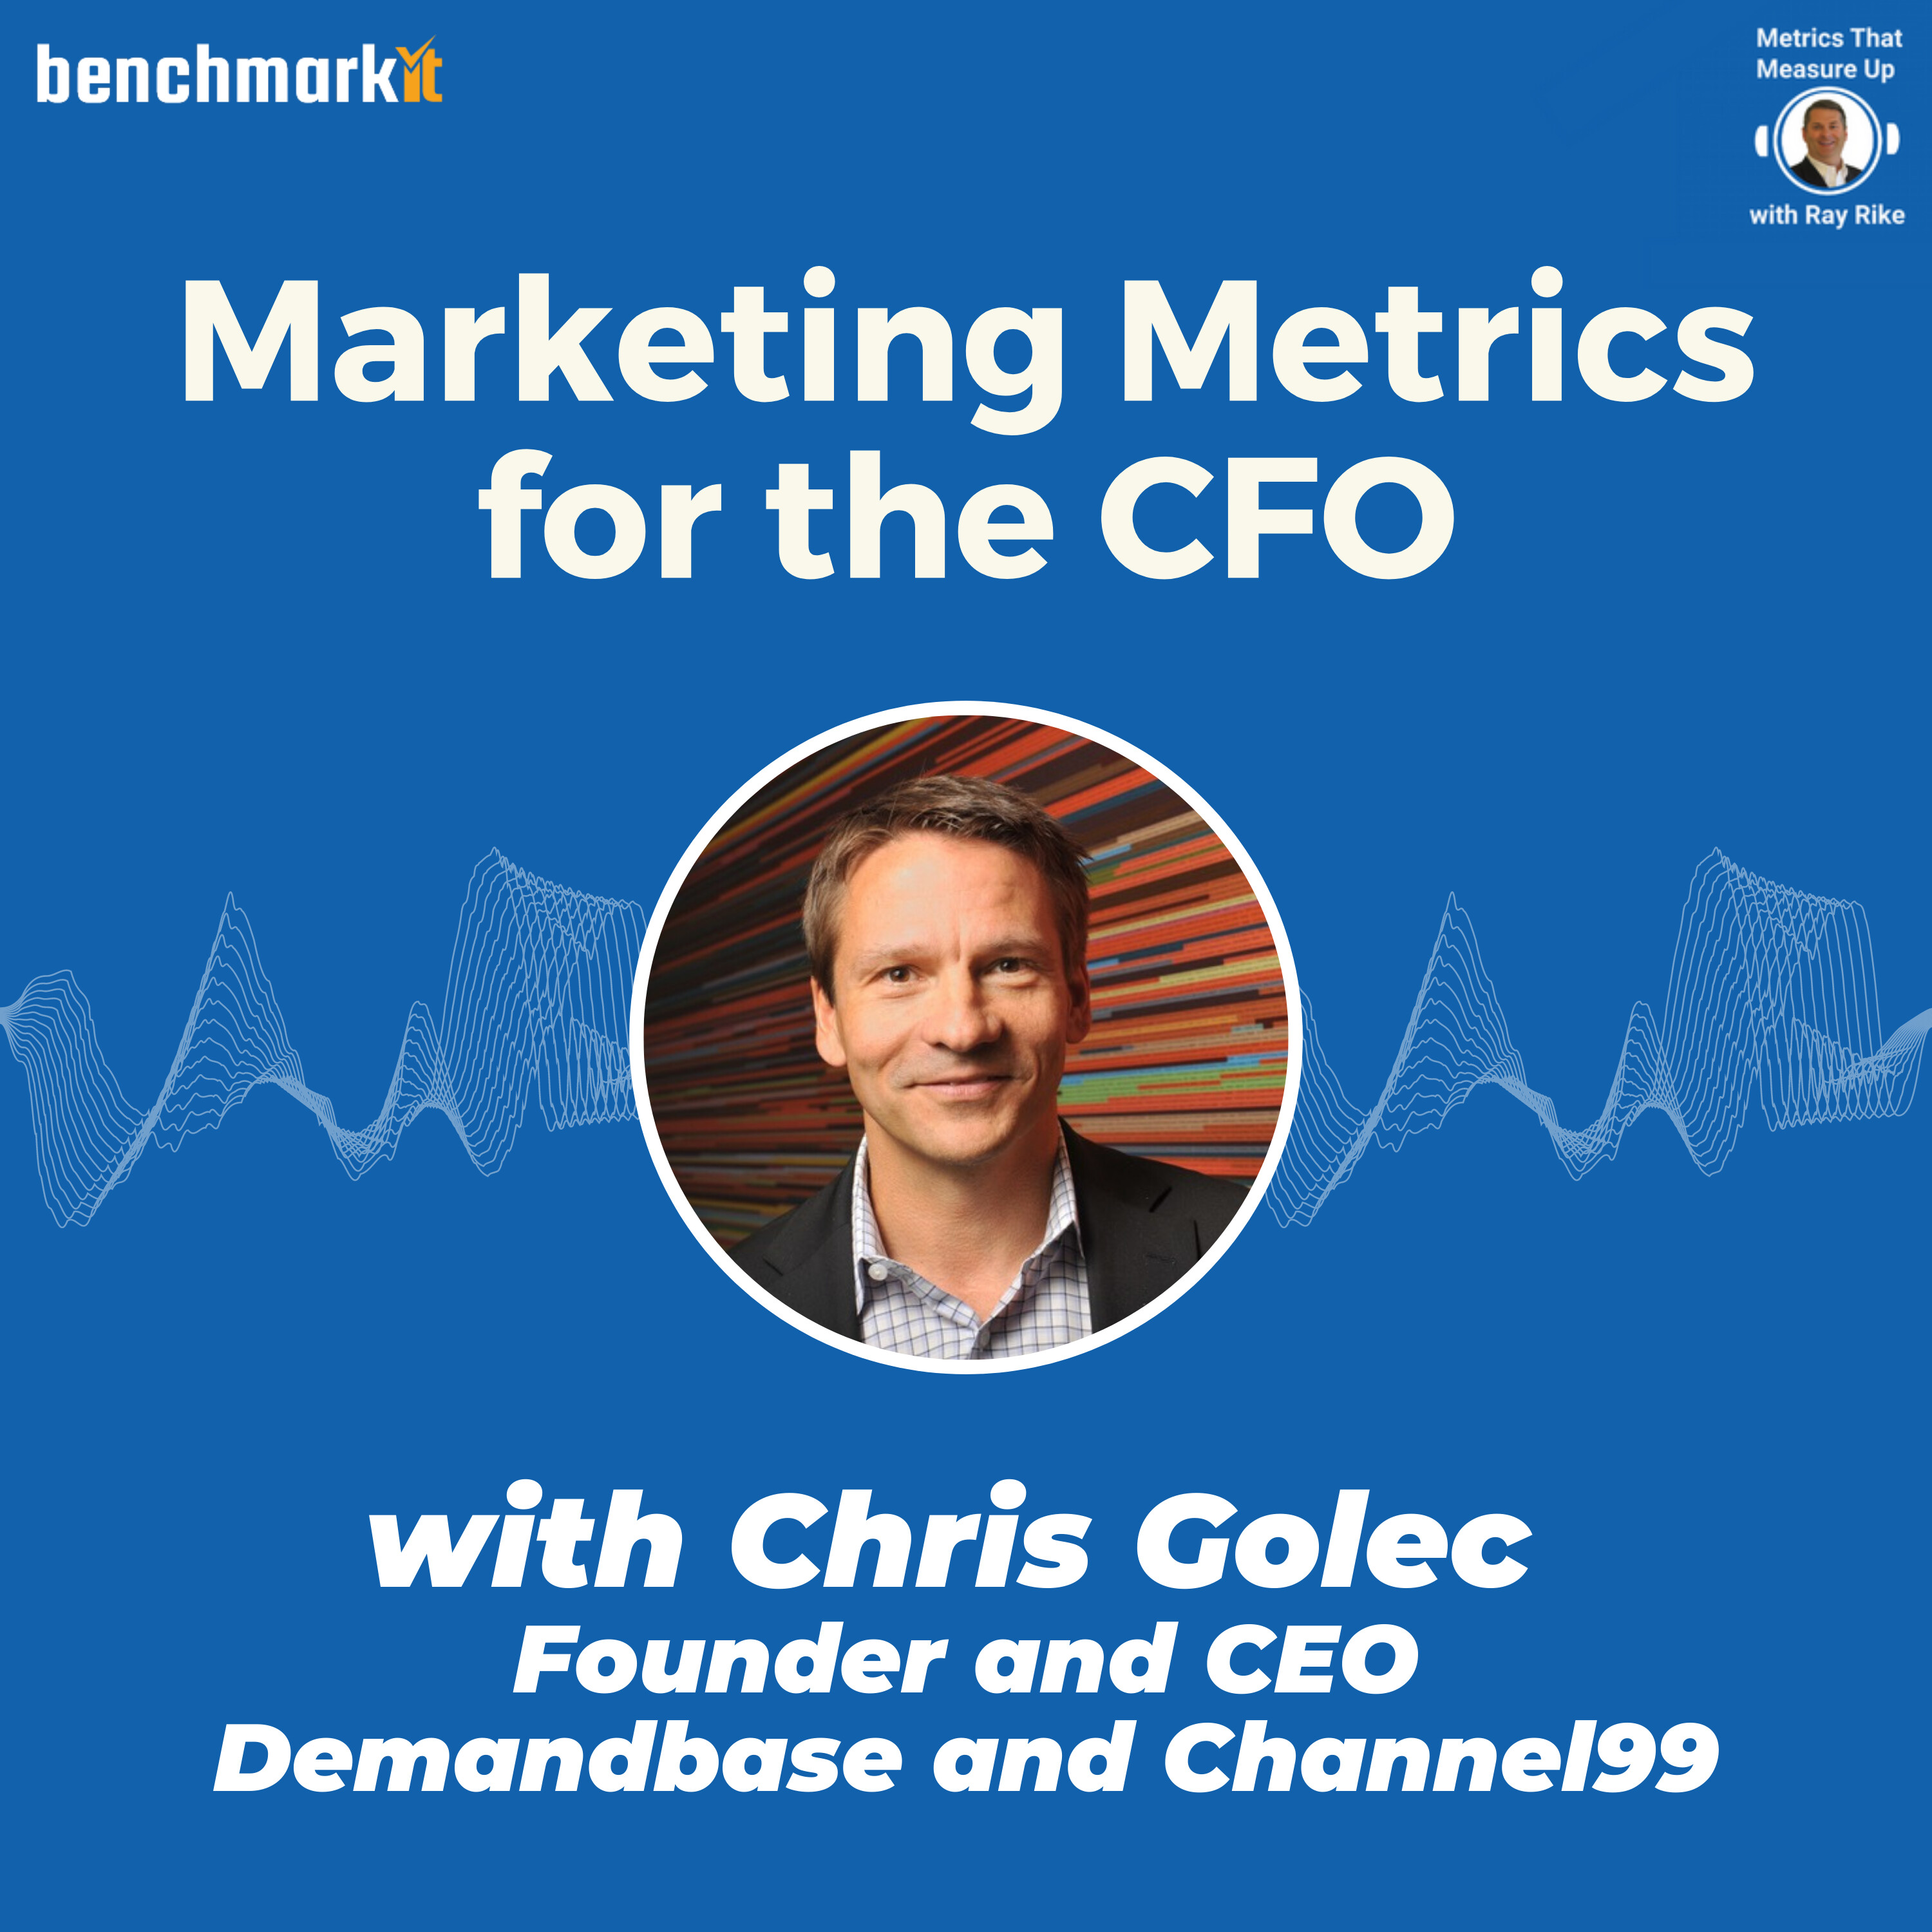 Marketing Metrics that Matter to the CFO - with Chris Golec, Founder and CEO Channel99 and Demandbase